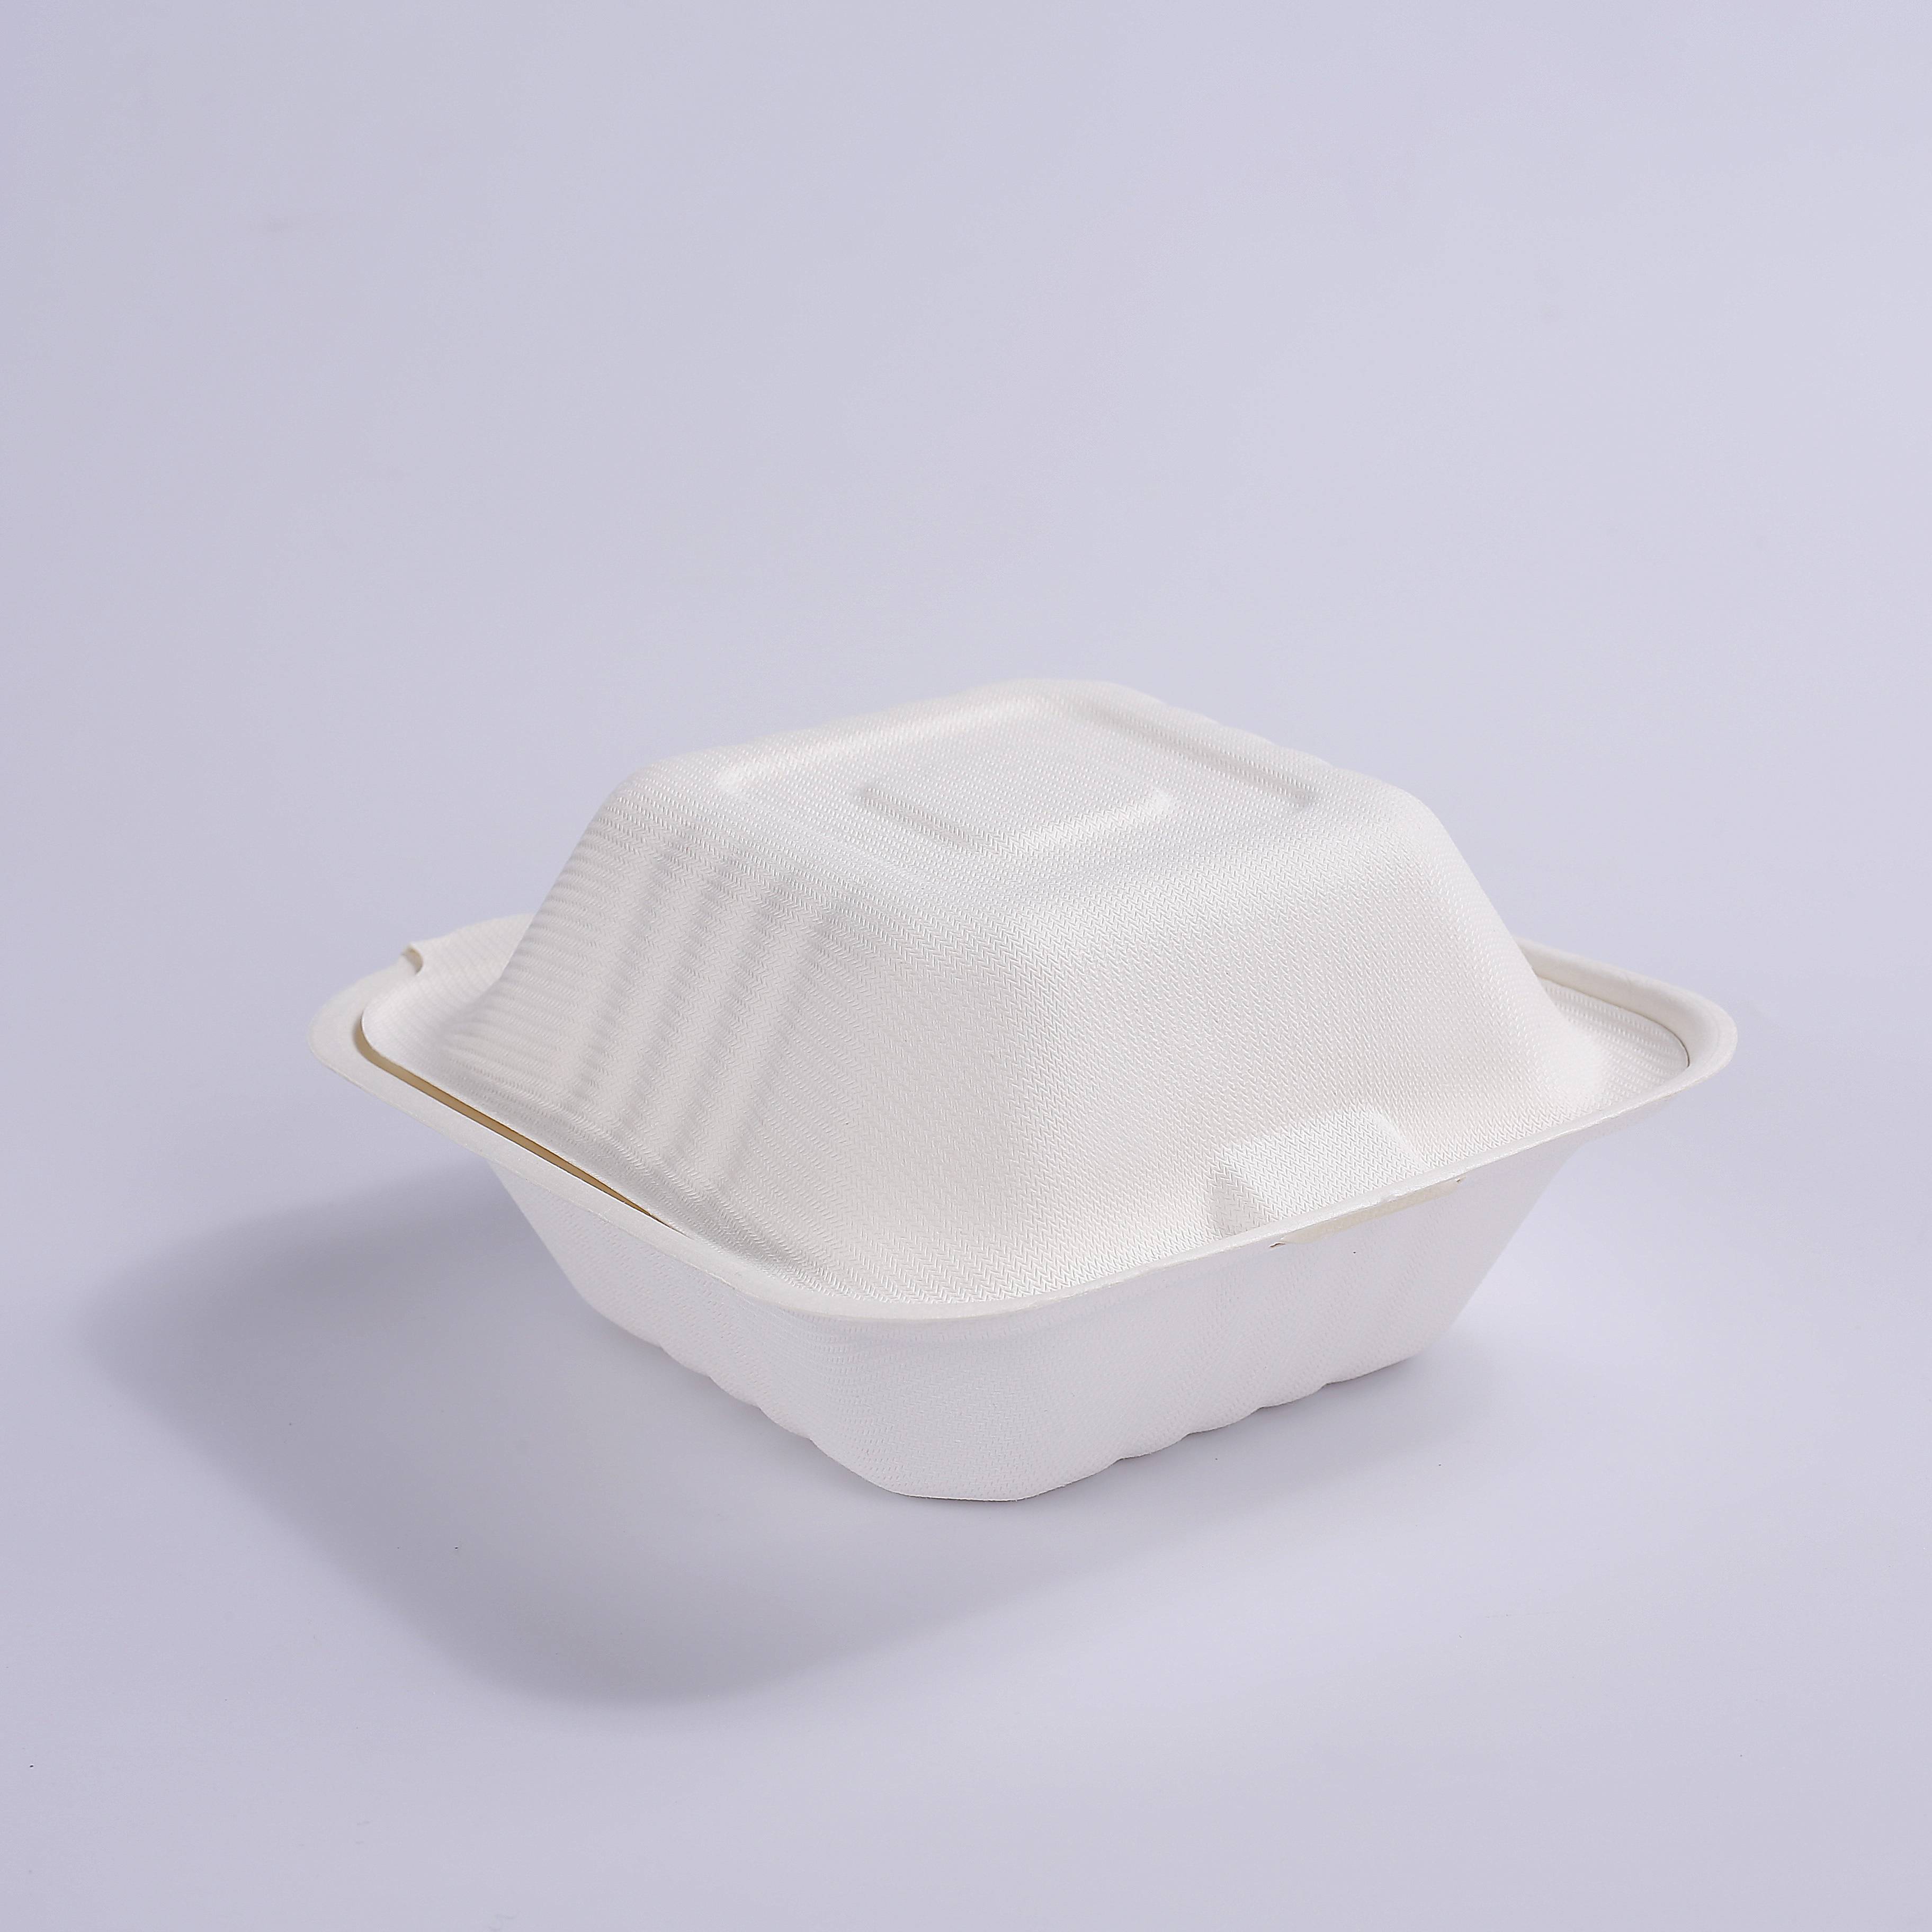 Best-Selling Bagasse Products - Bagasse 6*6″ Clamshell Takeout Containers, Biodegradable Eco Friendly Take Out to Go Food Containers with Lids for Lunch Leftover Meal Prep Storage, Microwave...